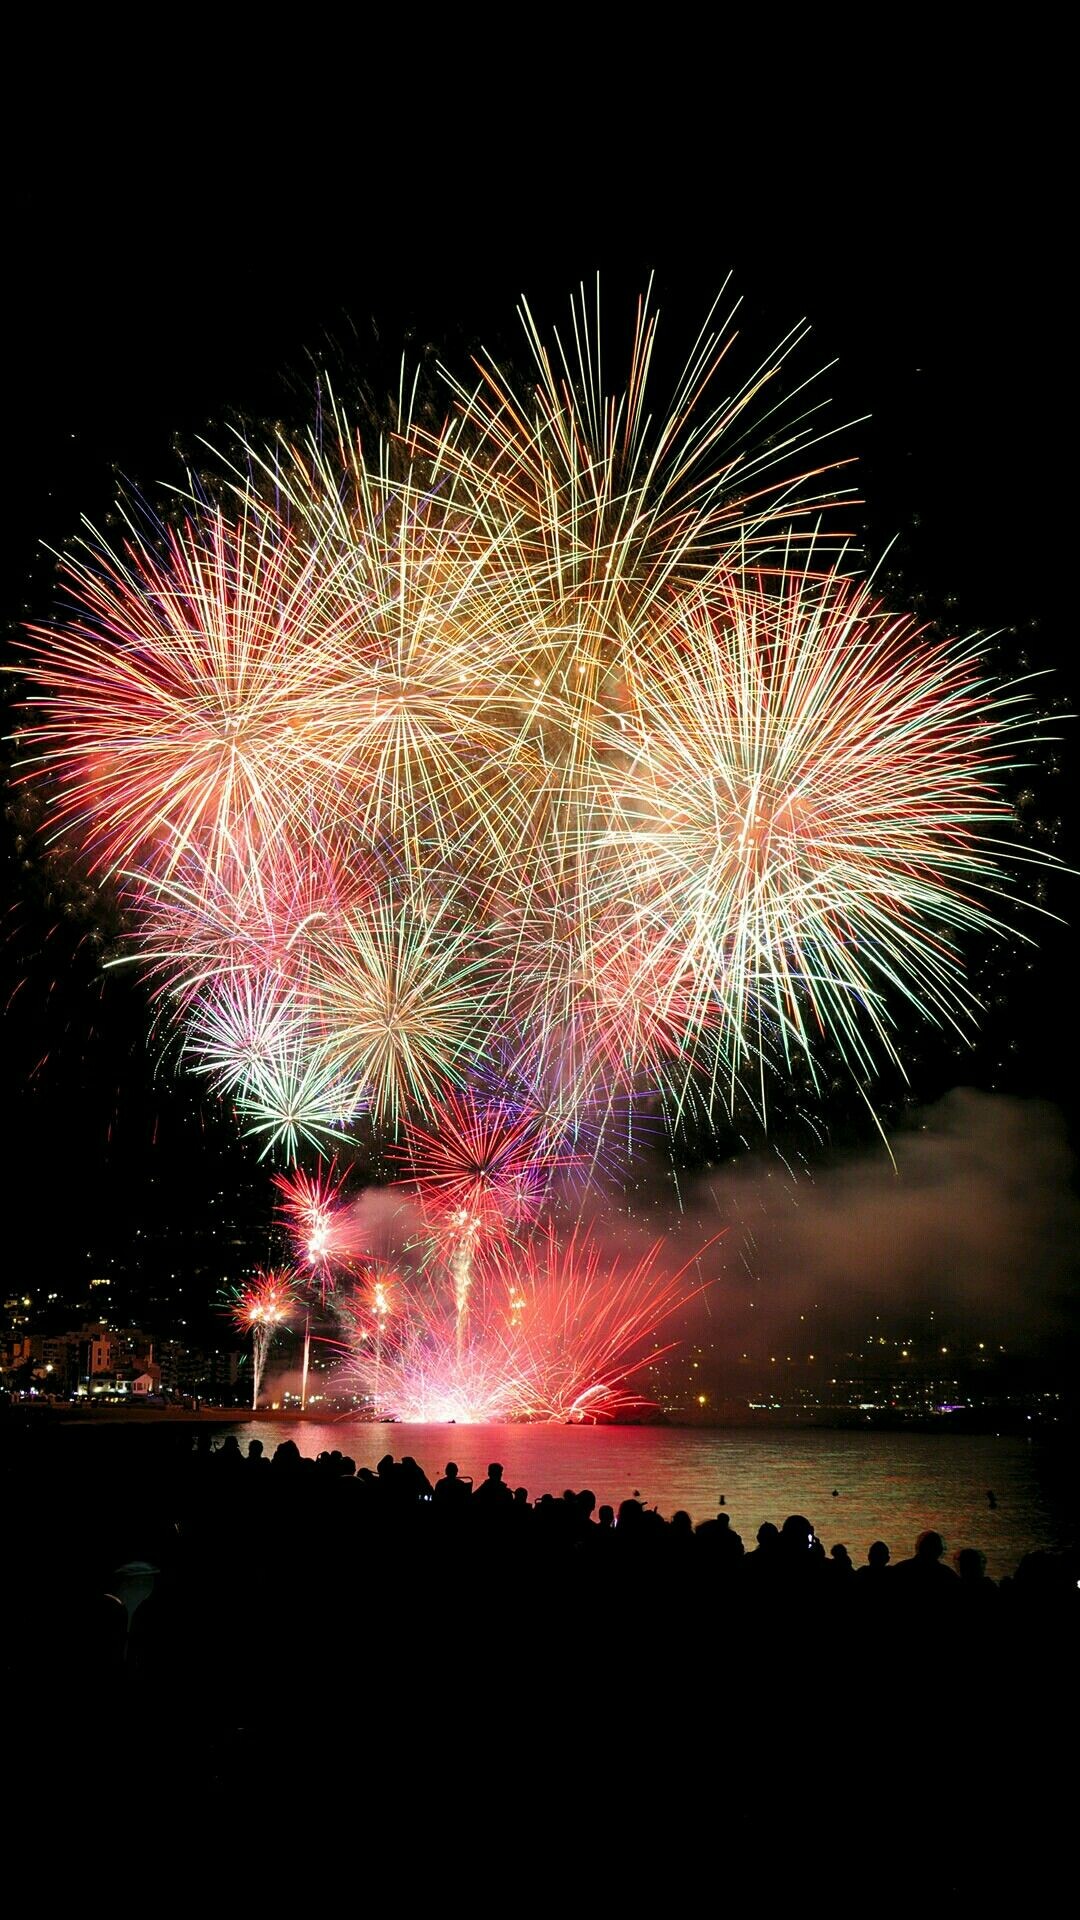 Firework: Popular way of celebrating Independence Day on July 4th. 1080x1920 Full HD Wallpaper.